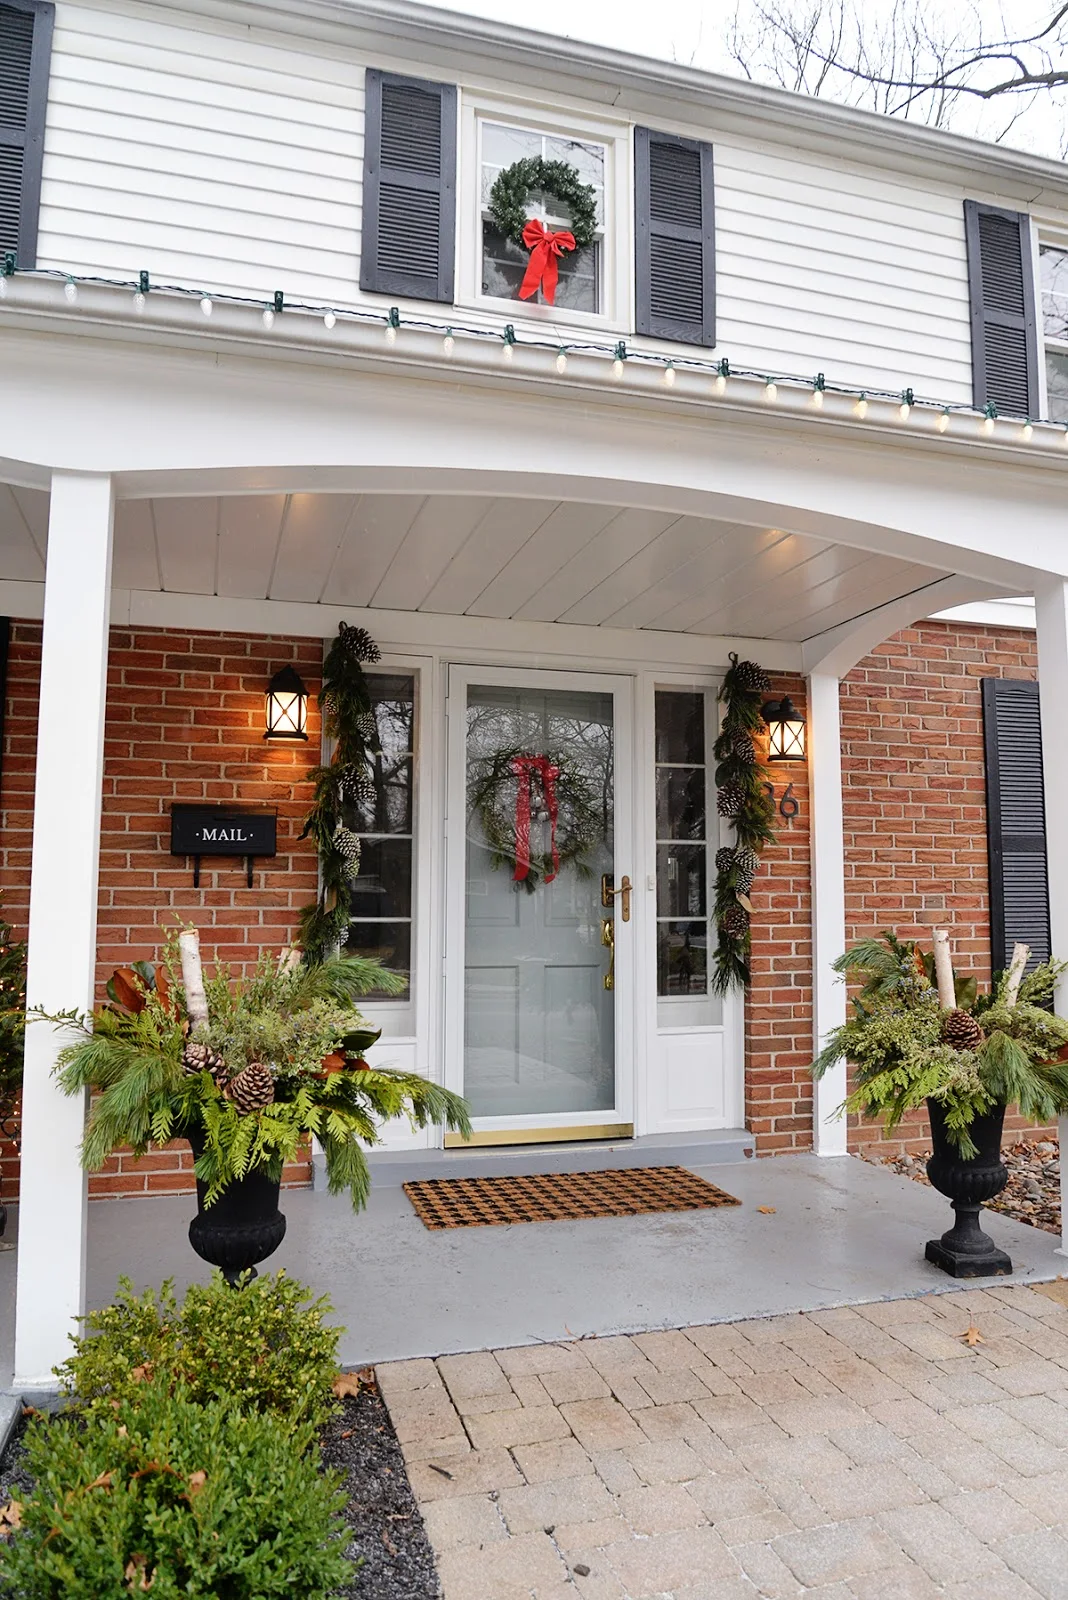 Christmas colonial house with wreaths in windows and DIY outdoor planter